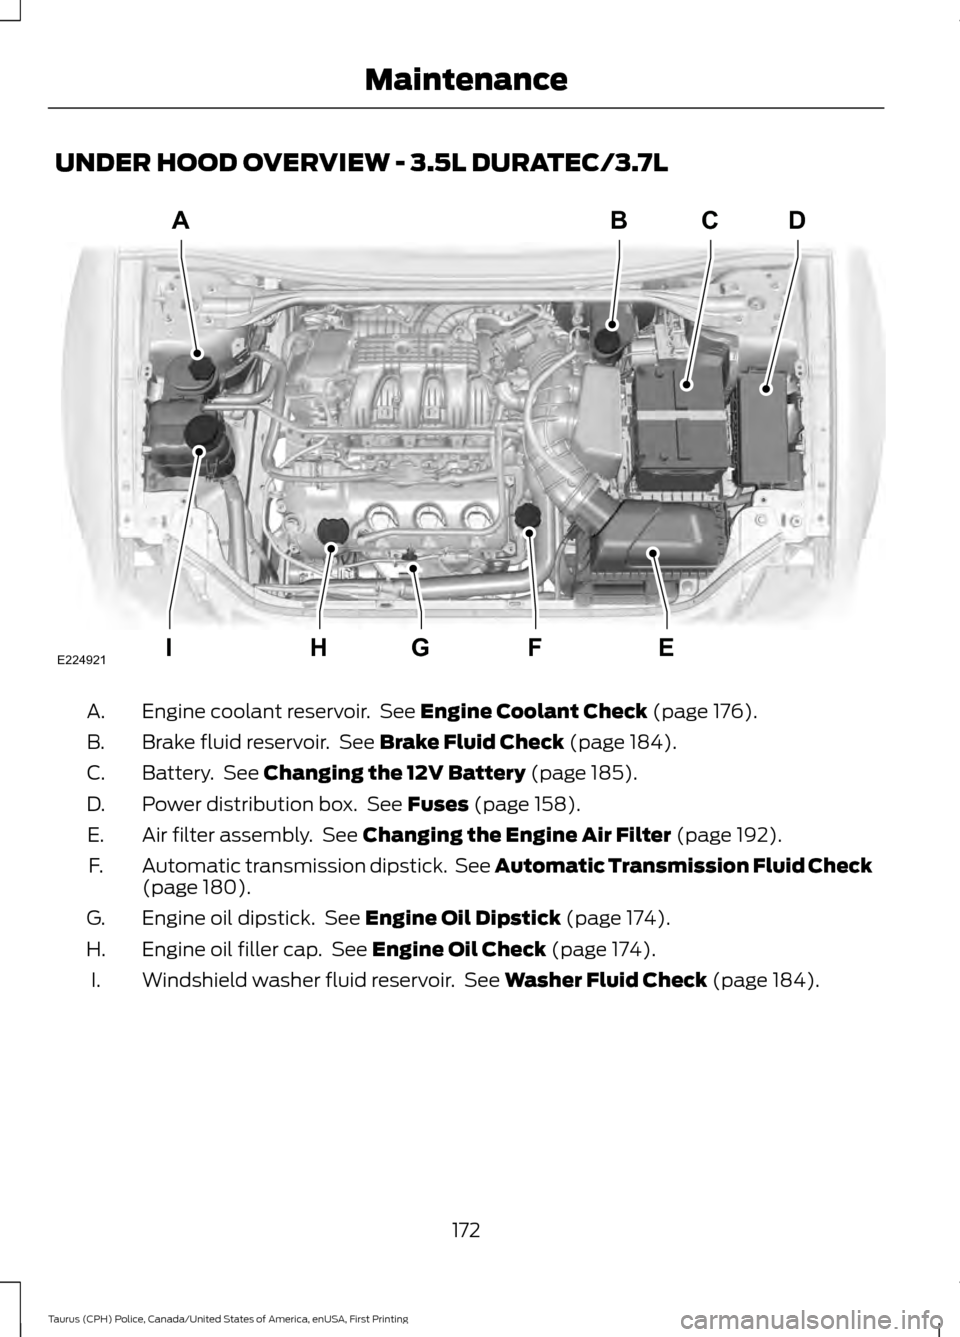 FORD POLICE INTERCEPTOR SEDAN 2017 1.G Owners Manual UNDER HOOD OVERVIEW - 3.5L DURATEC/3.7L
Engine coolant reservoir.  See Engine Coolant Check (page 176).
A.
Brake fluid reservoir.  See 
Brake Fluid Check (page 184).
B.
Battery.  See 
Changing the 12V